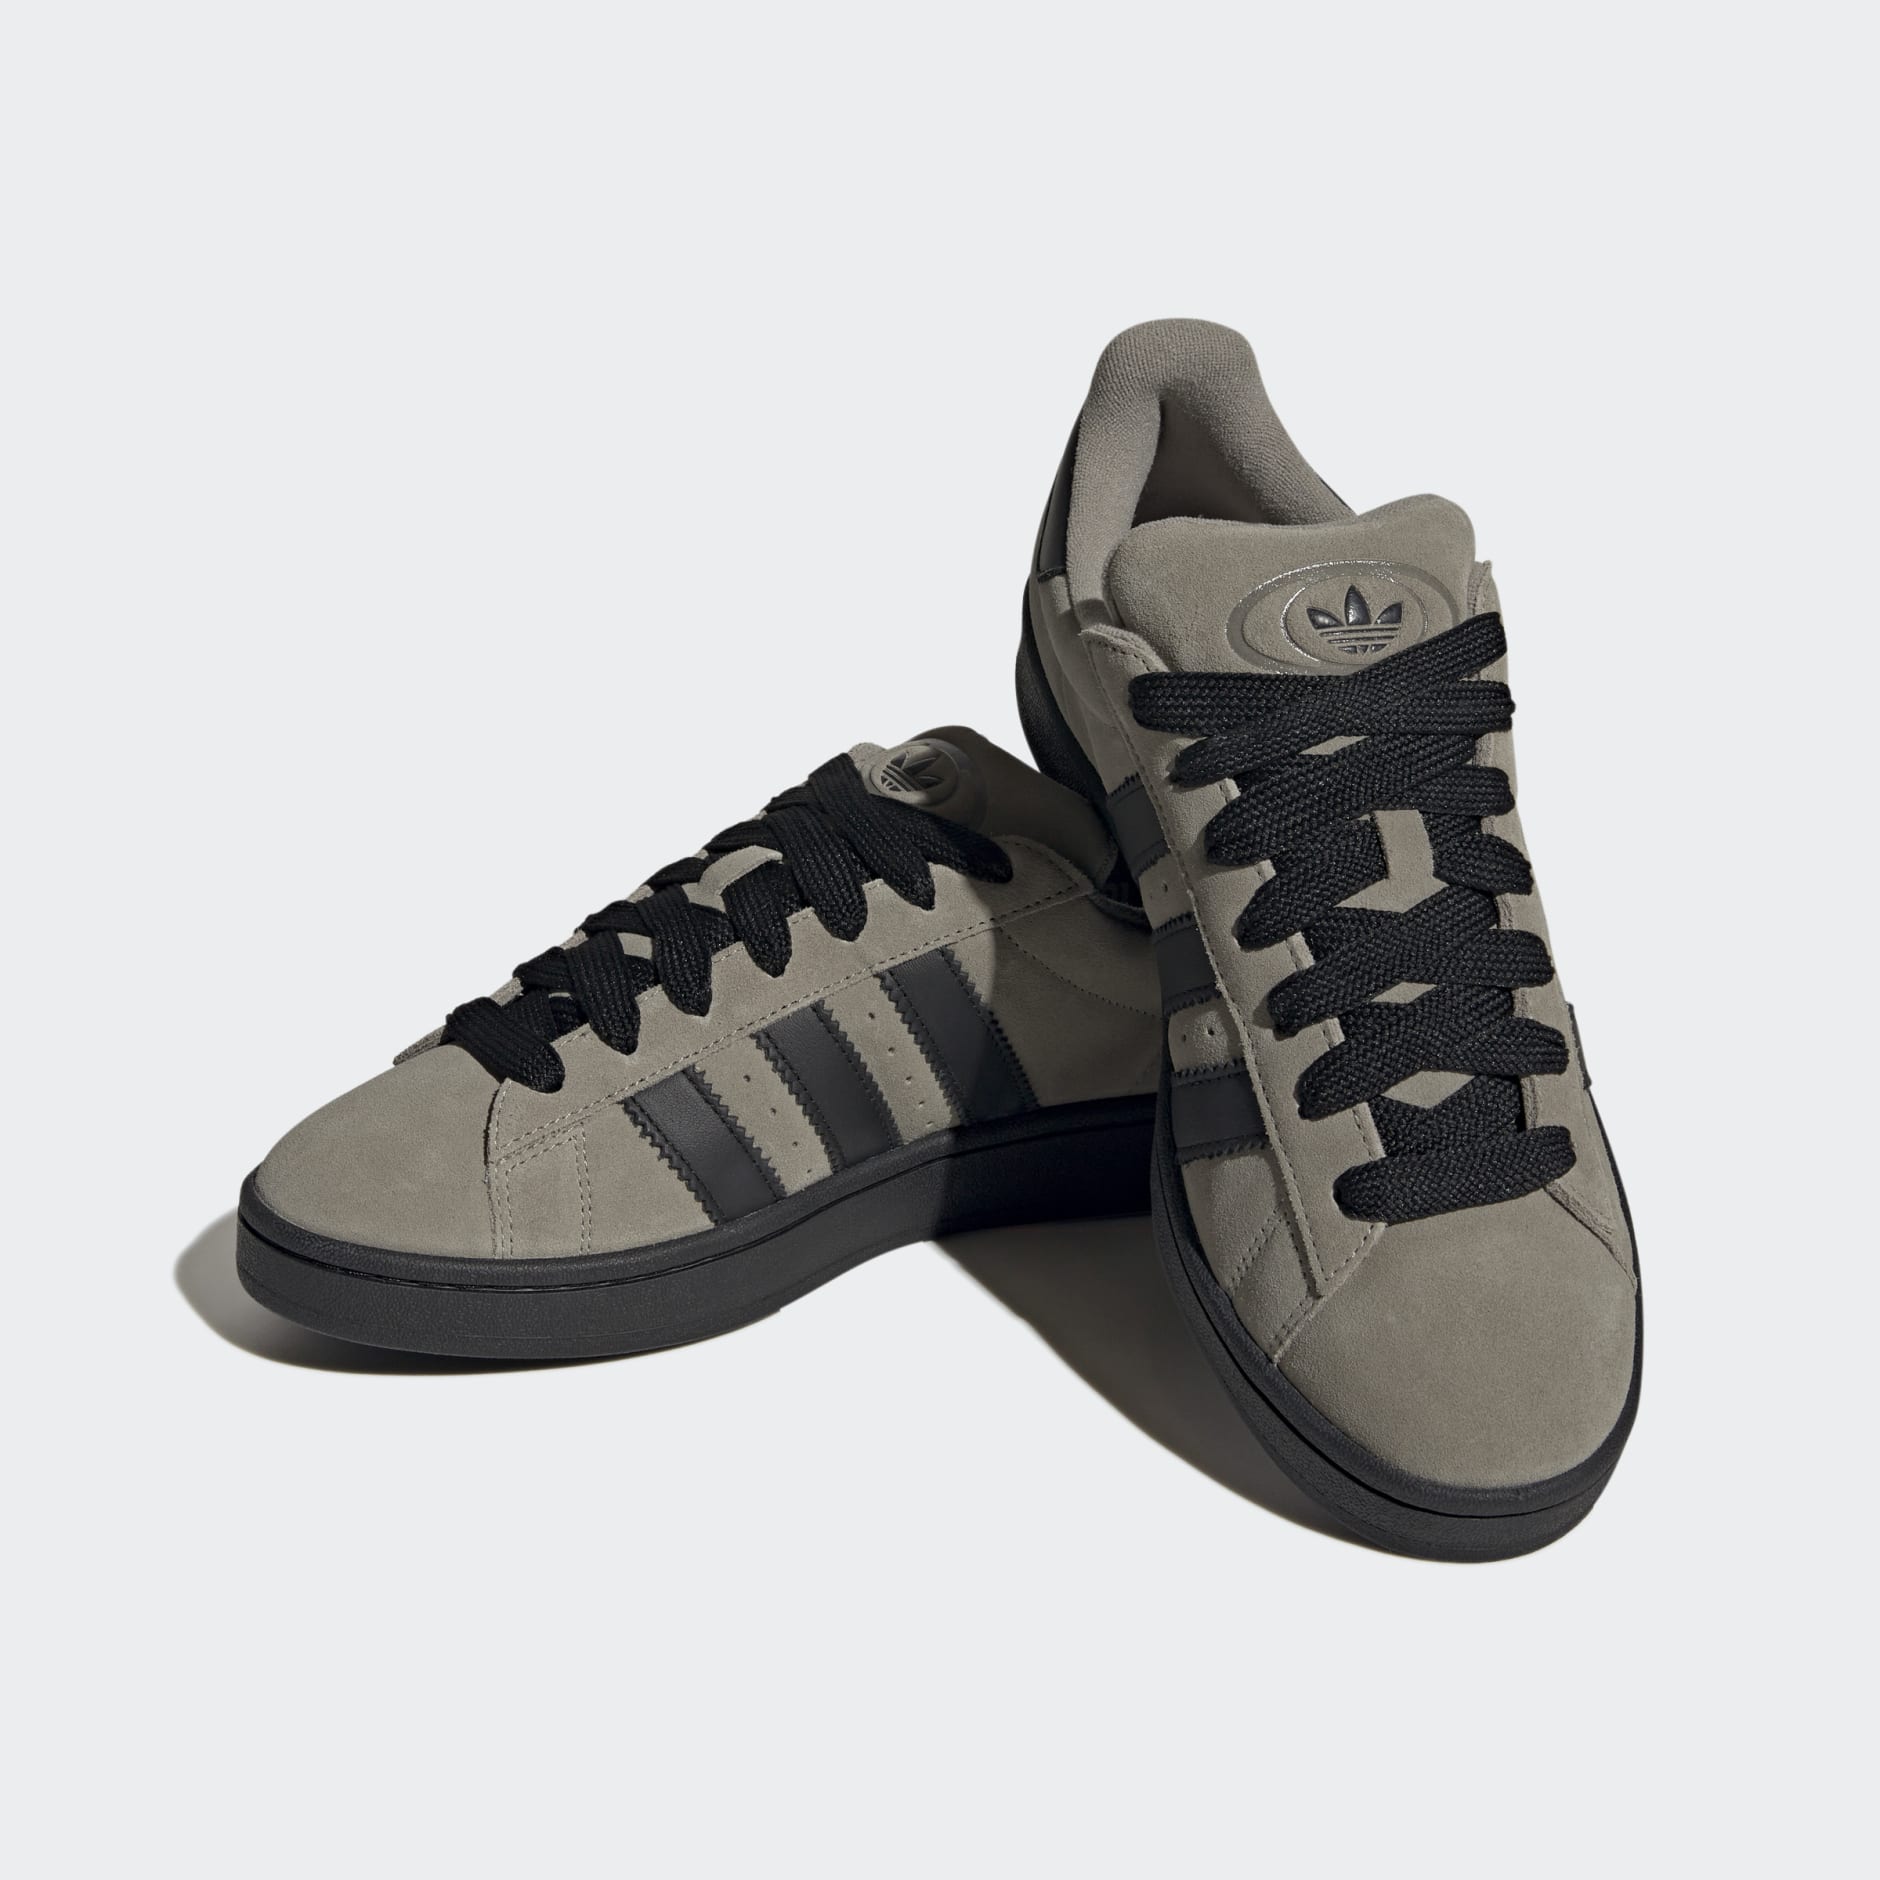 Men's Shoes - Campus 00s Shoes - Green | adidas Qatar